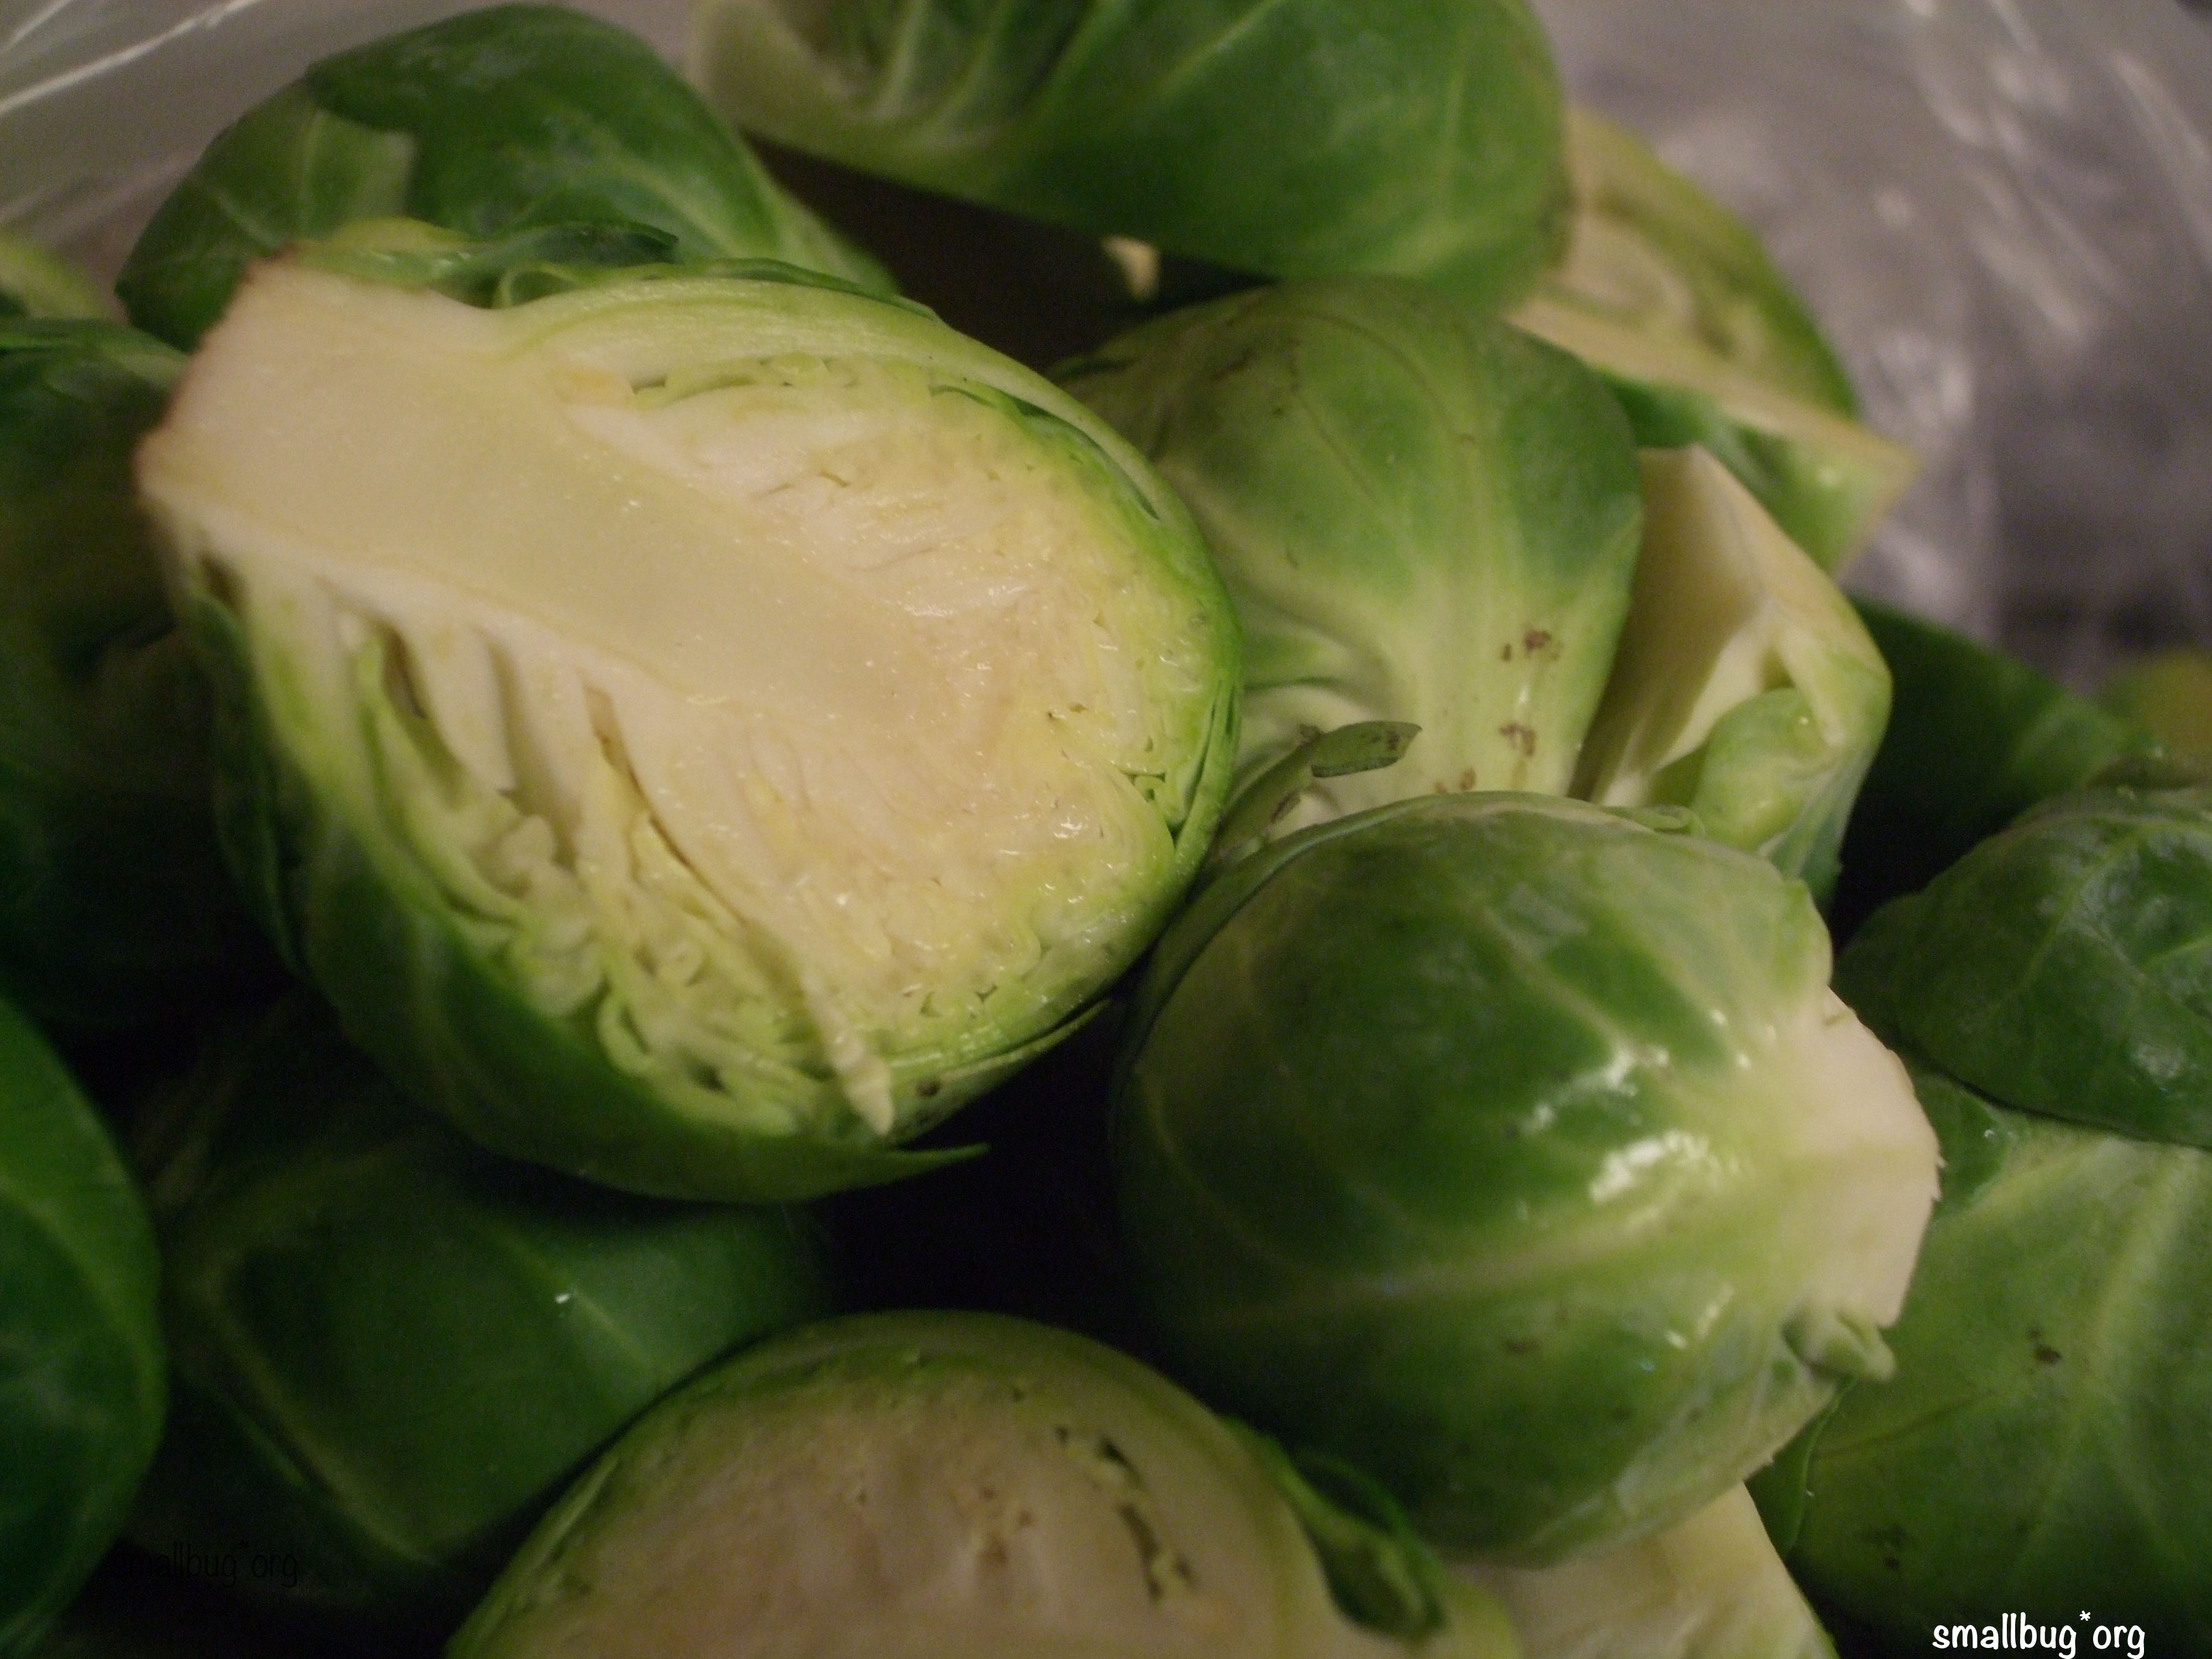 Brussel sprouts = good; wait, what?